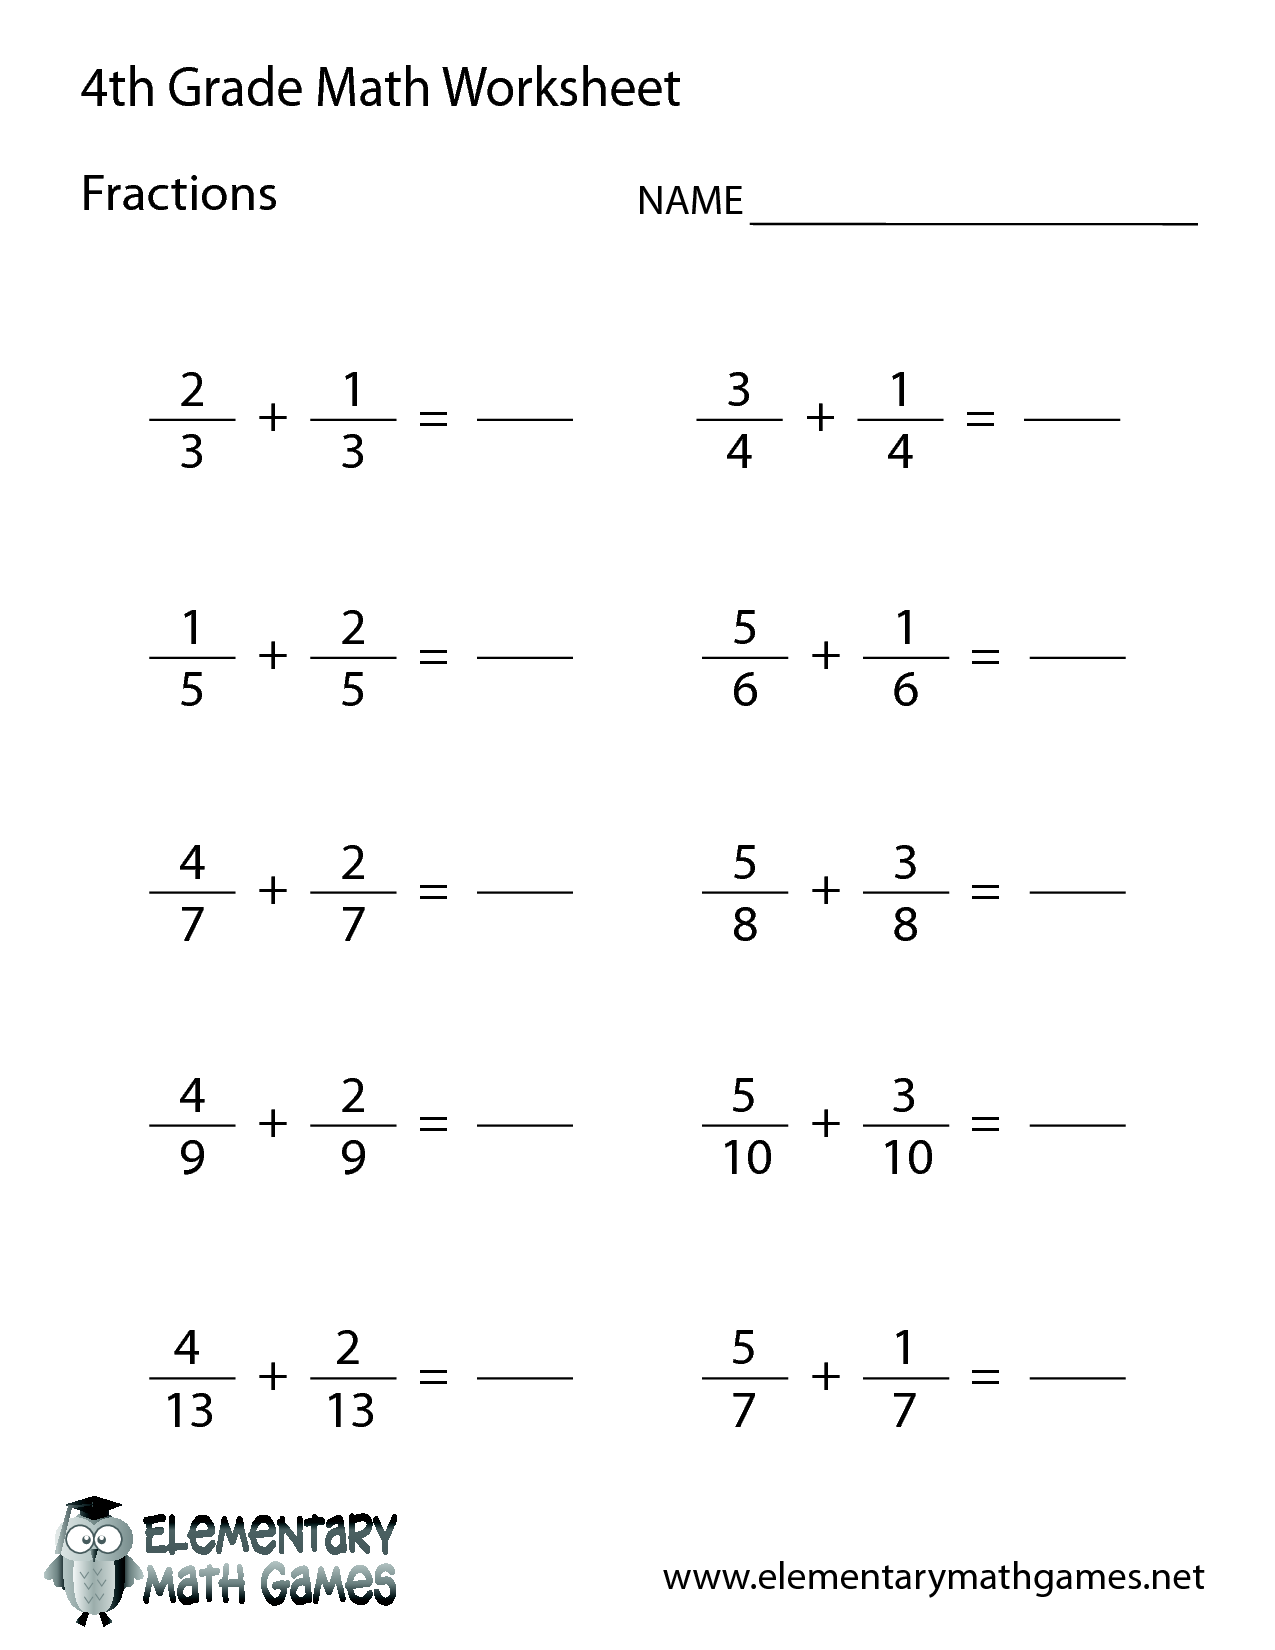 Free Math Worksheets for 4th Grade Image